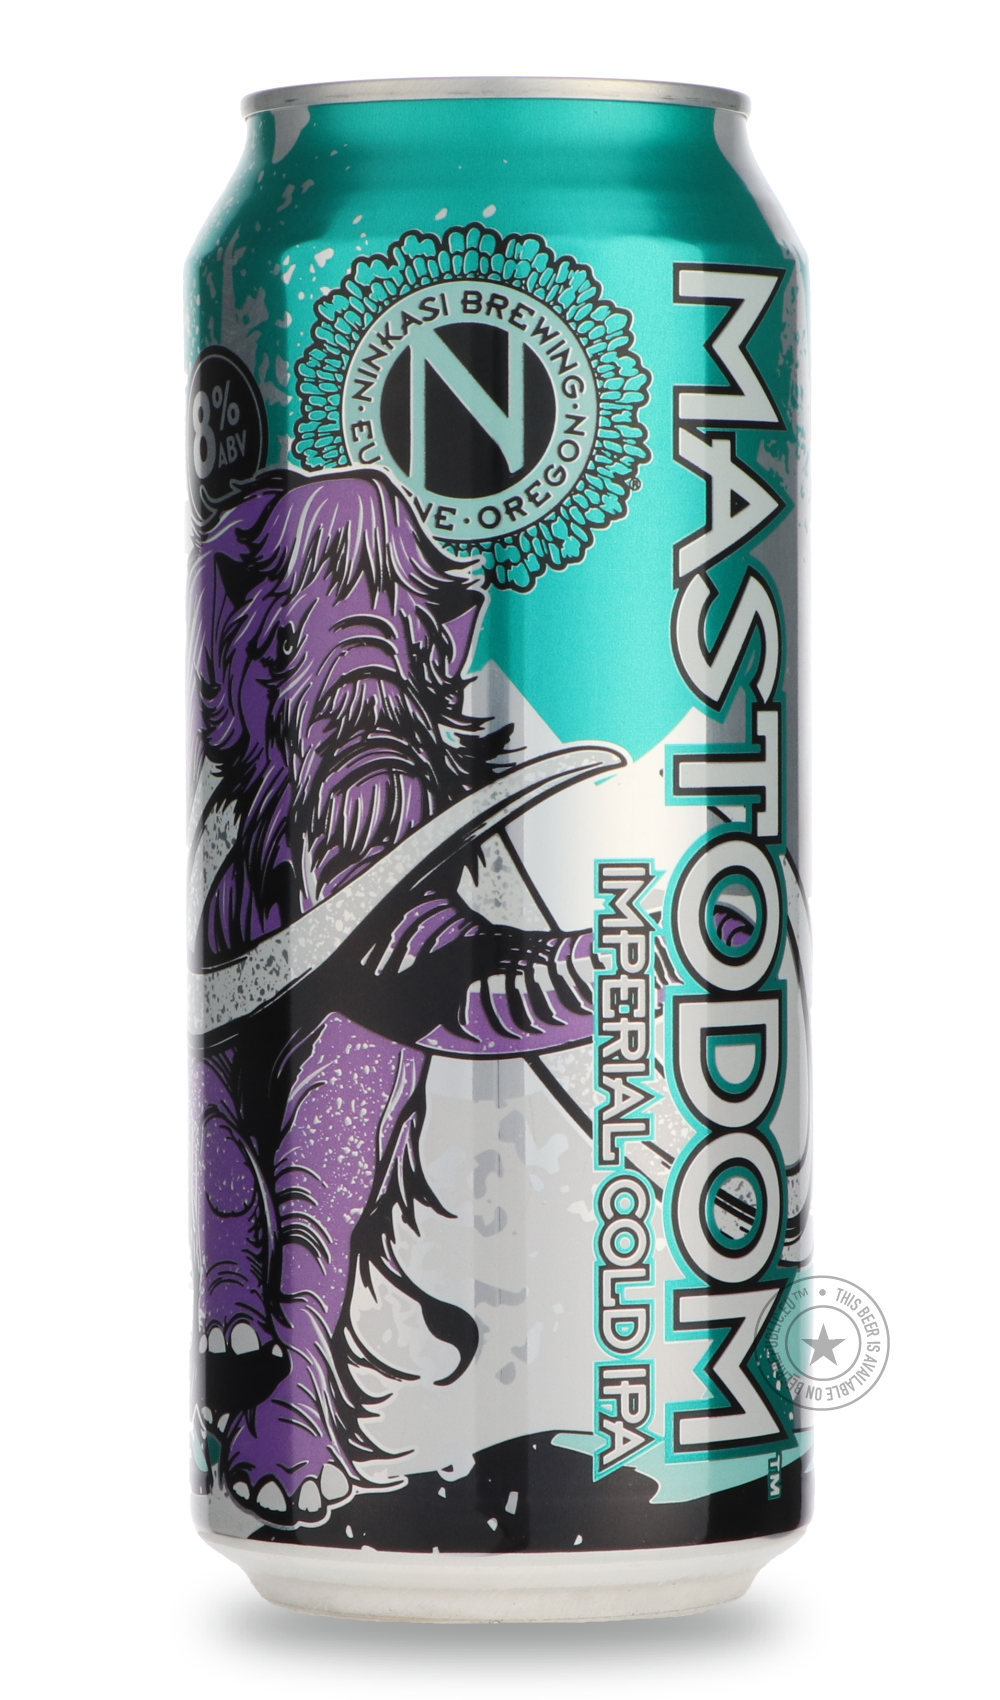 -Ninkasi- Mastodom-IPA- Only @ Beer Republic - The best online beer store for American & Canadian craft beer - Buy beer online from the USA and Canada - Bier online kopen - Amerikaans bier kopen - Craft beer store - Craft beer kopen - Amerikanisch bier kaufen - Bier online kaufen - Acheter biere online - IPA - Stout - Porter - New England IPA - Hazy IPA - Imperial Stout - Barrel Aged - Barrel Aged Imperial Stout - Brown - Dark beer - Blond - Blonde - Pilsner - Lager - Wheat - Weizen - Amber - Barley Wine - 